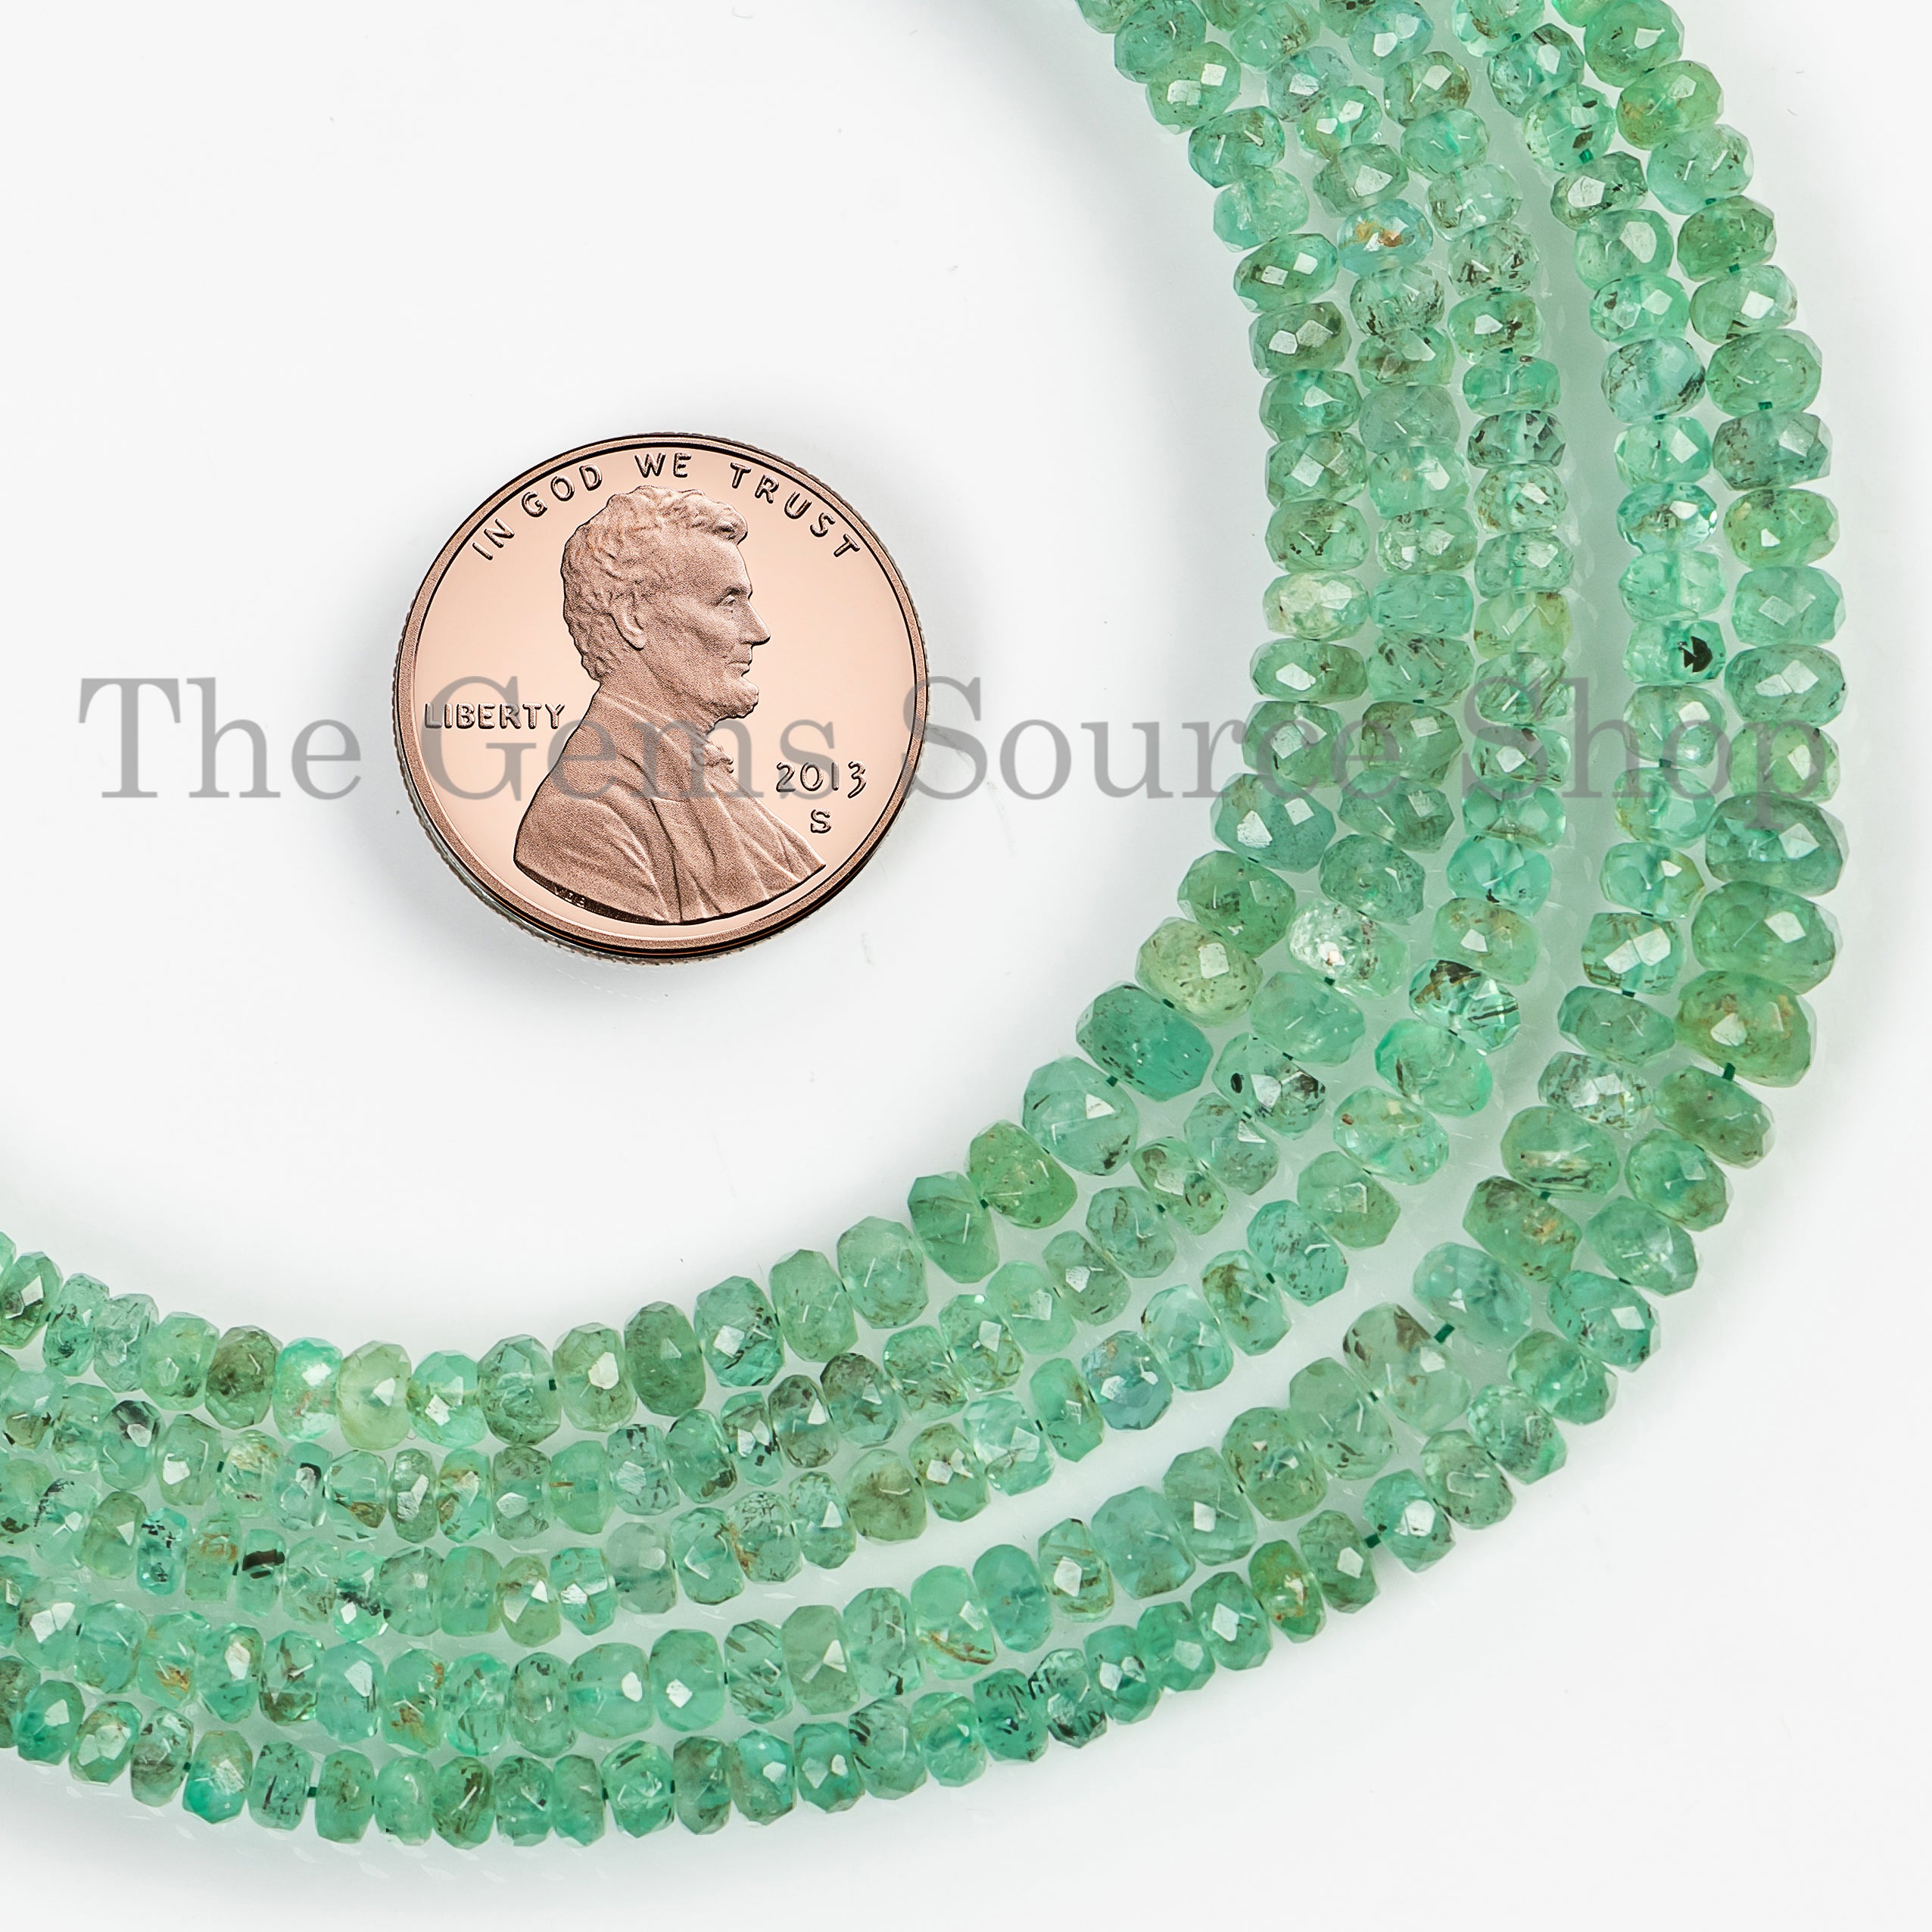 Natural Emerald Beads, 2.5-4 mm Emerald Rondelle Beads, Emerald Faceted Beads, Emerald Rondelle Gemstone Beads, Emerald Jewelry Making Beads